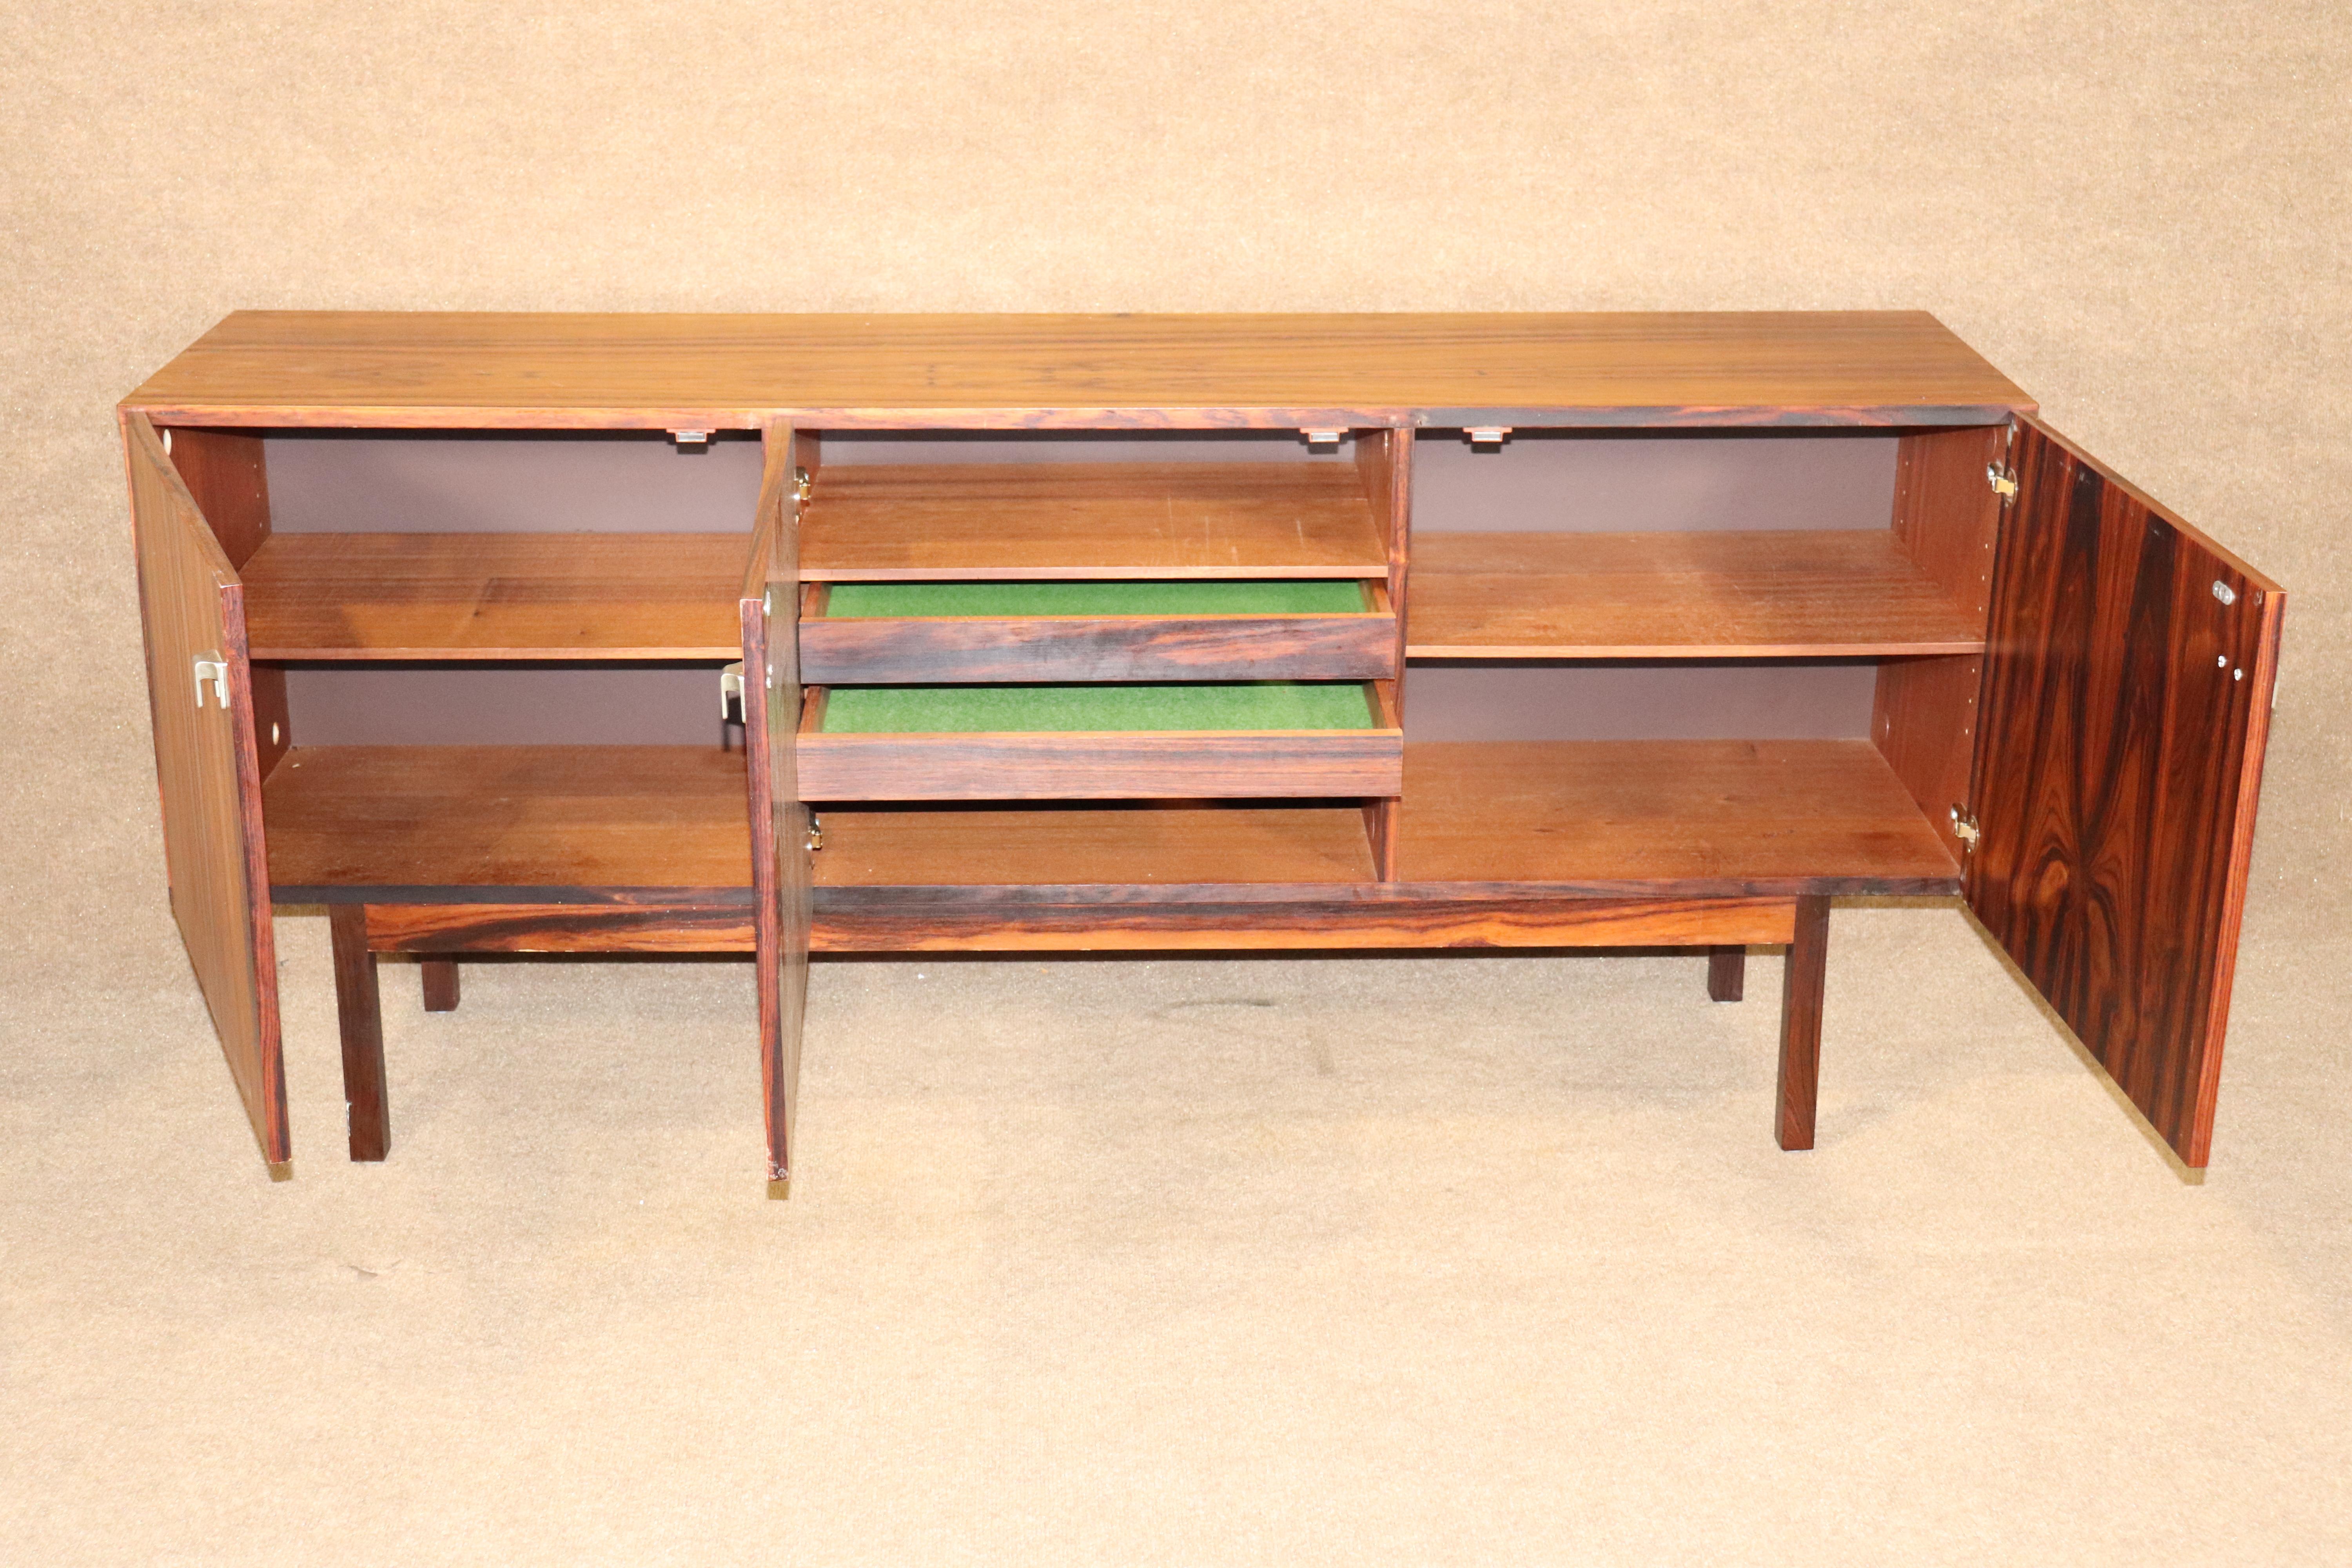 Long Mid-Century Modern sideboard with cabinet storage. Rich rosewood grain throughout with accenting aluminum hardware.
Please confirm location NY or NJ.